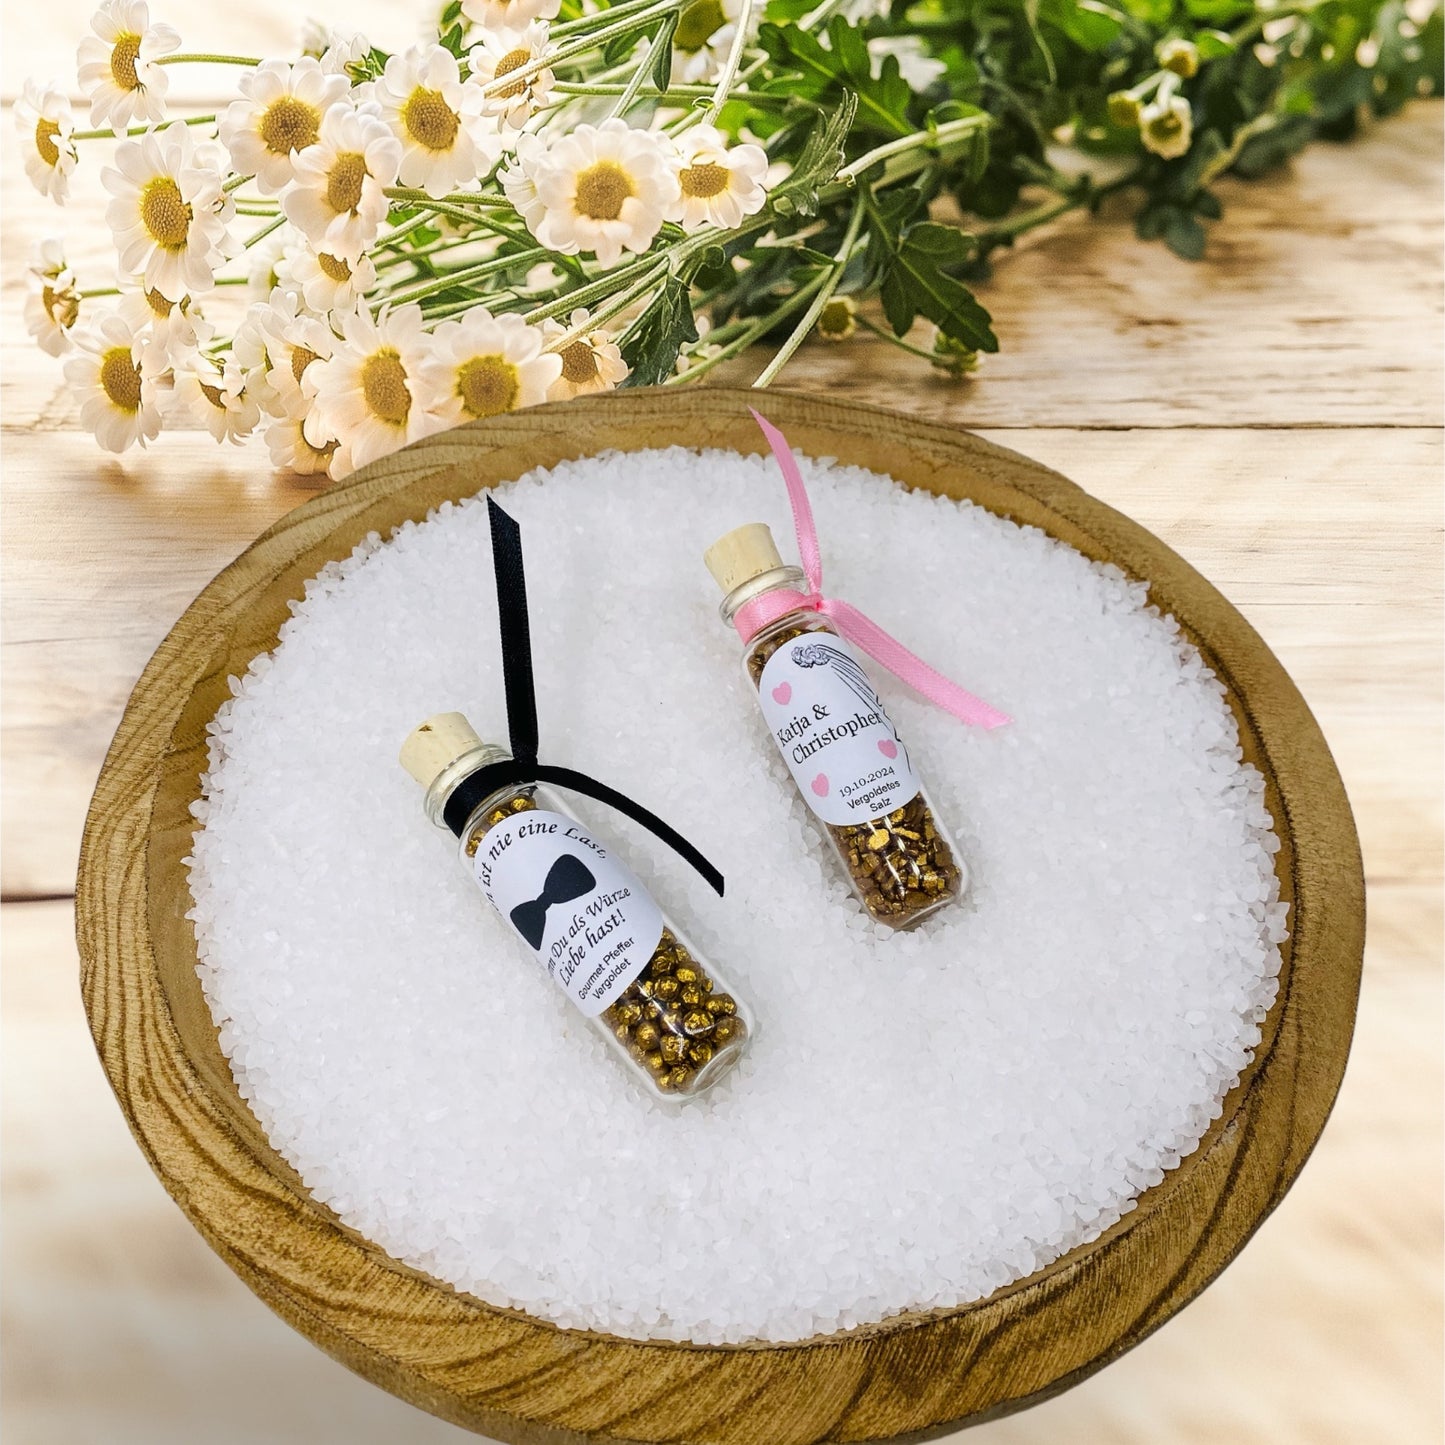 Salt and pepper as a timeless guest gift for your wedding reception